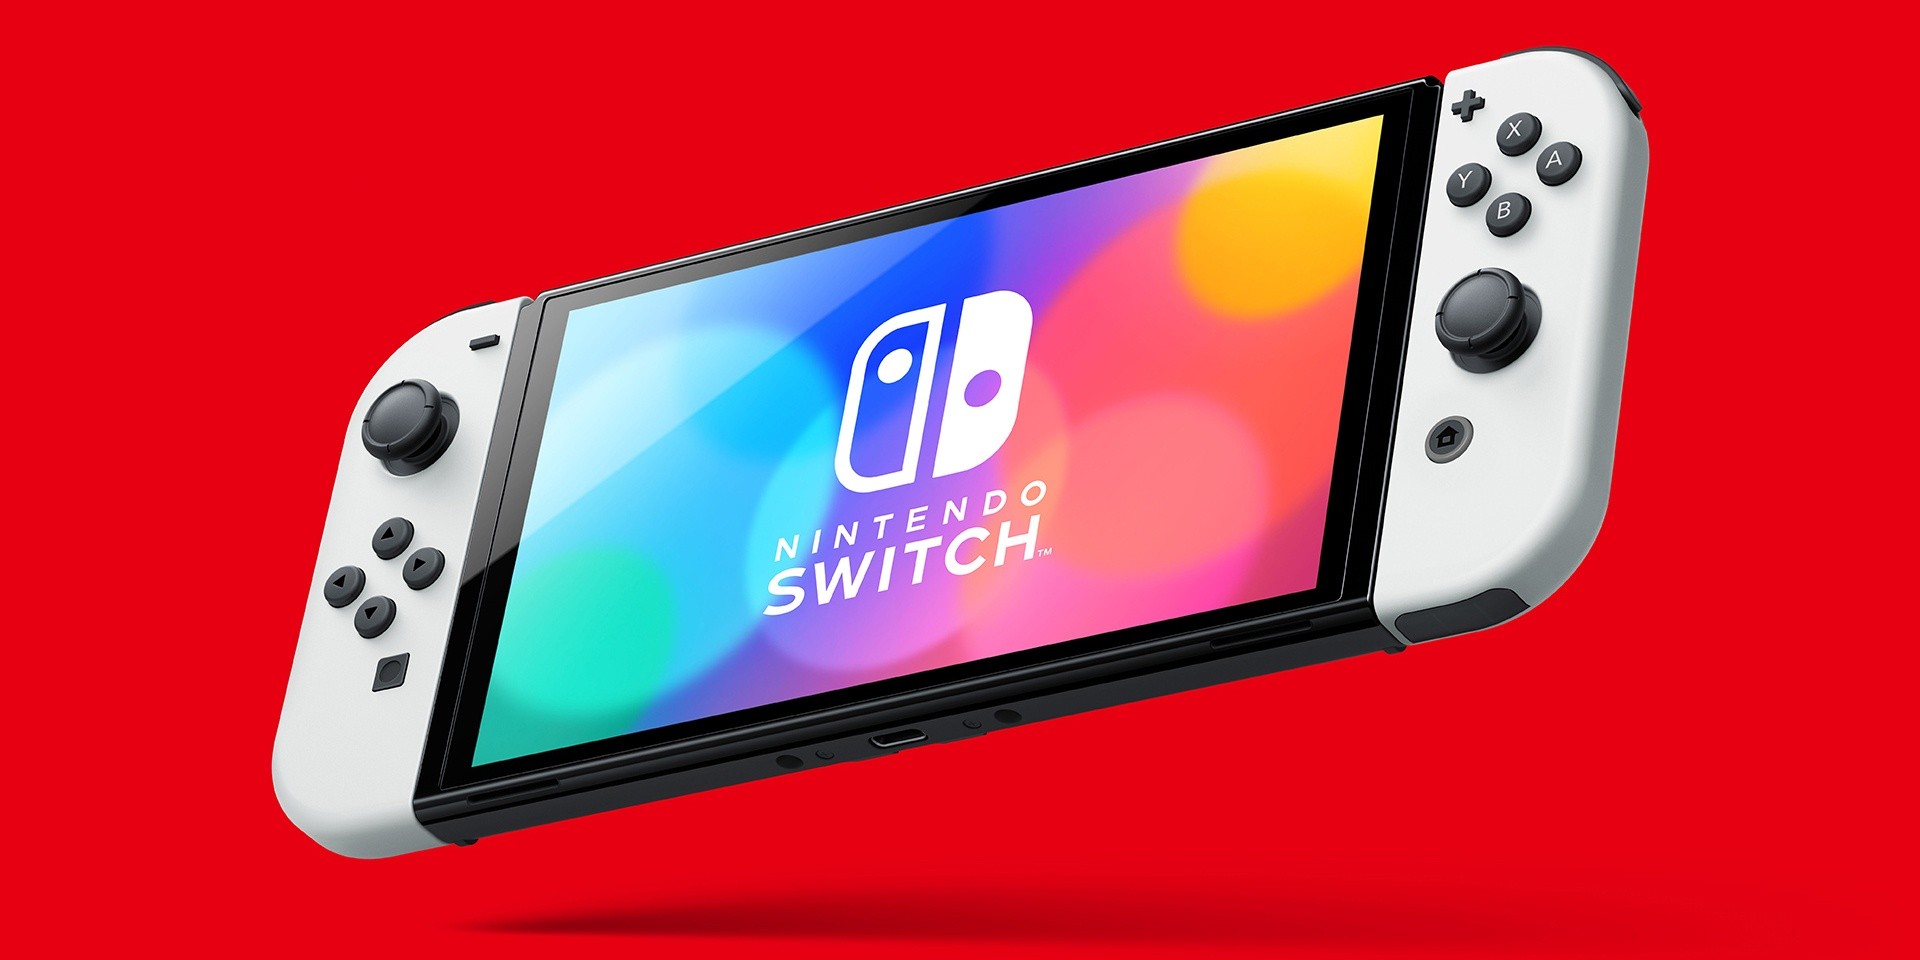 Nintendo announces new Nintendo Switch model with 7-inch OLED screen, enhanced audio, and more